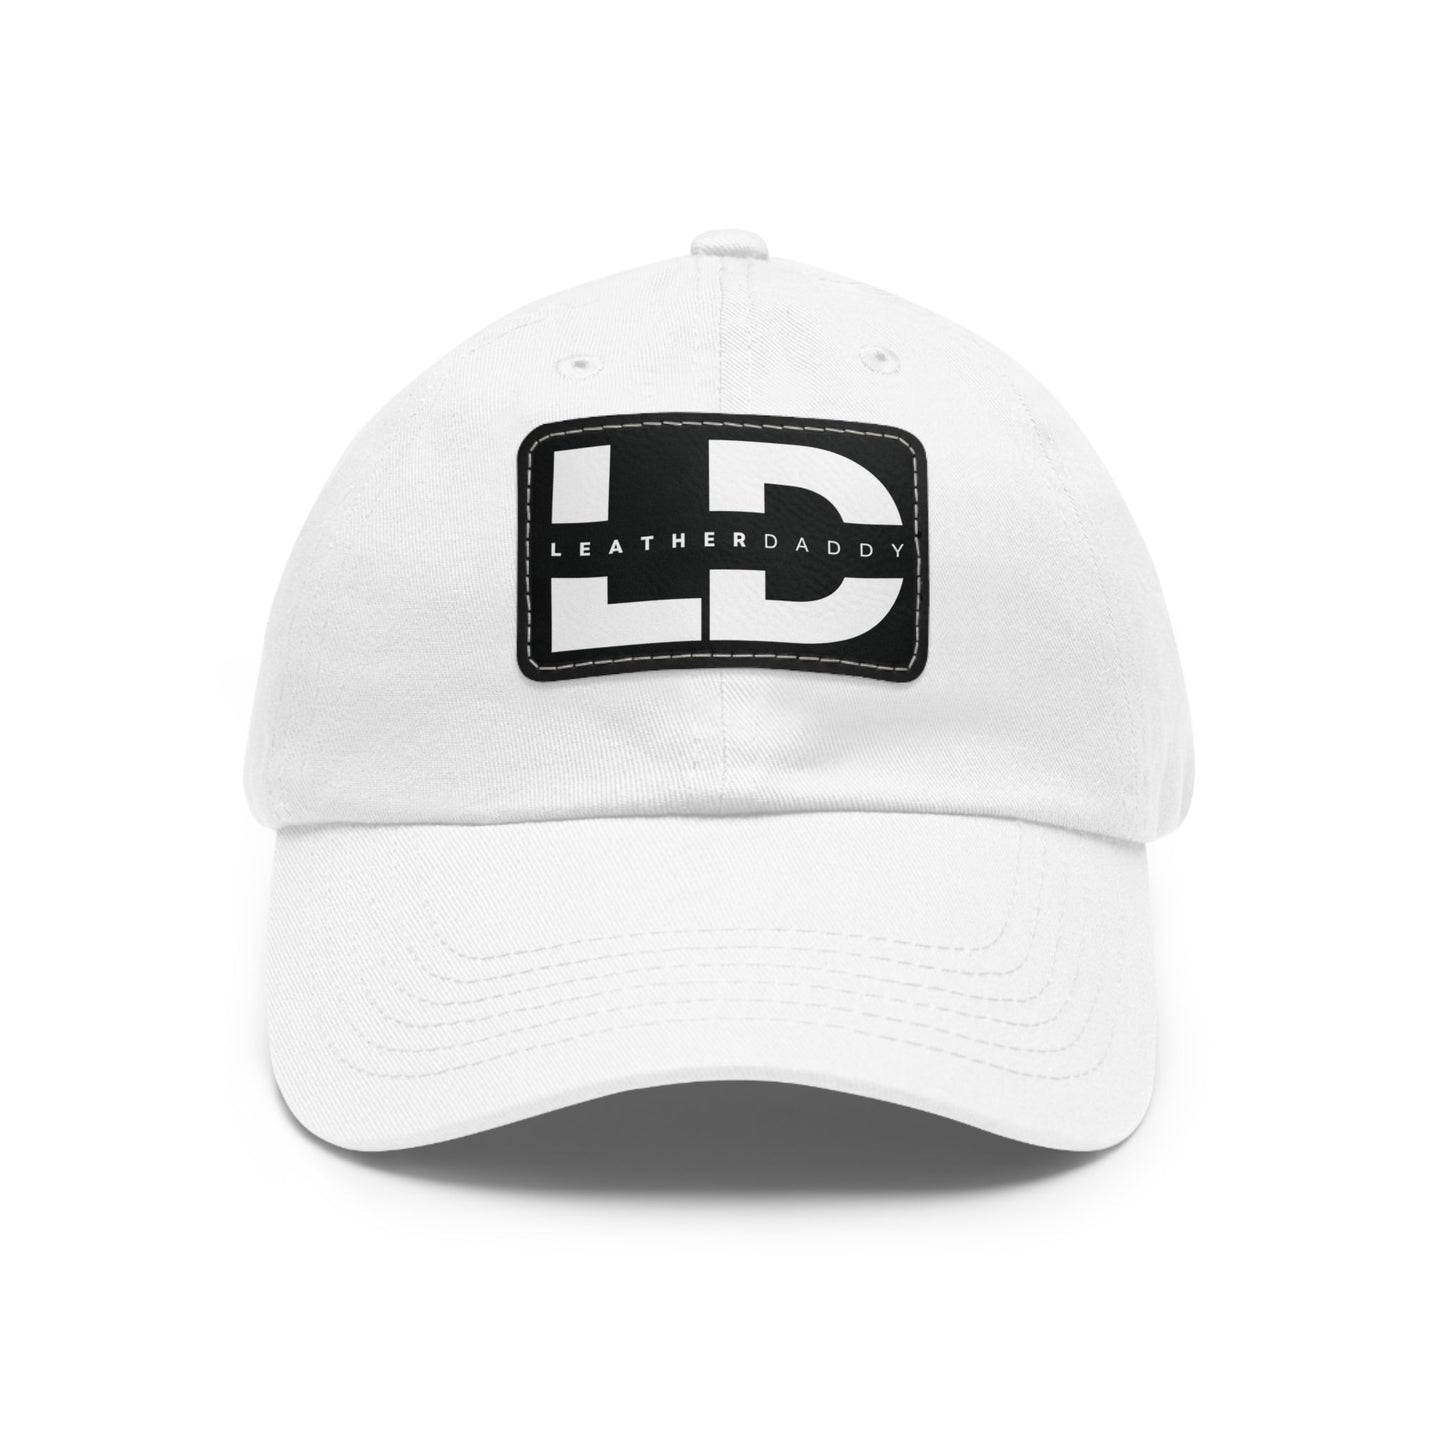 Hats White / Black patch / Rectangle / One size Dad Hat with Leather Patch (Rectangle) LEATHERDADDY BATOR